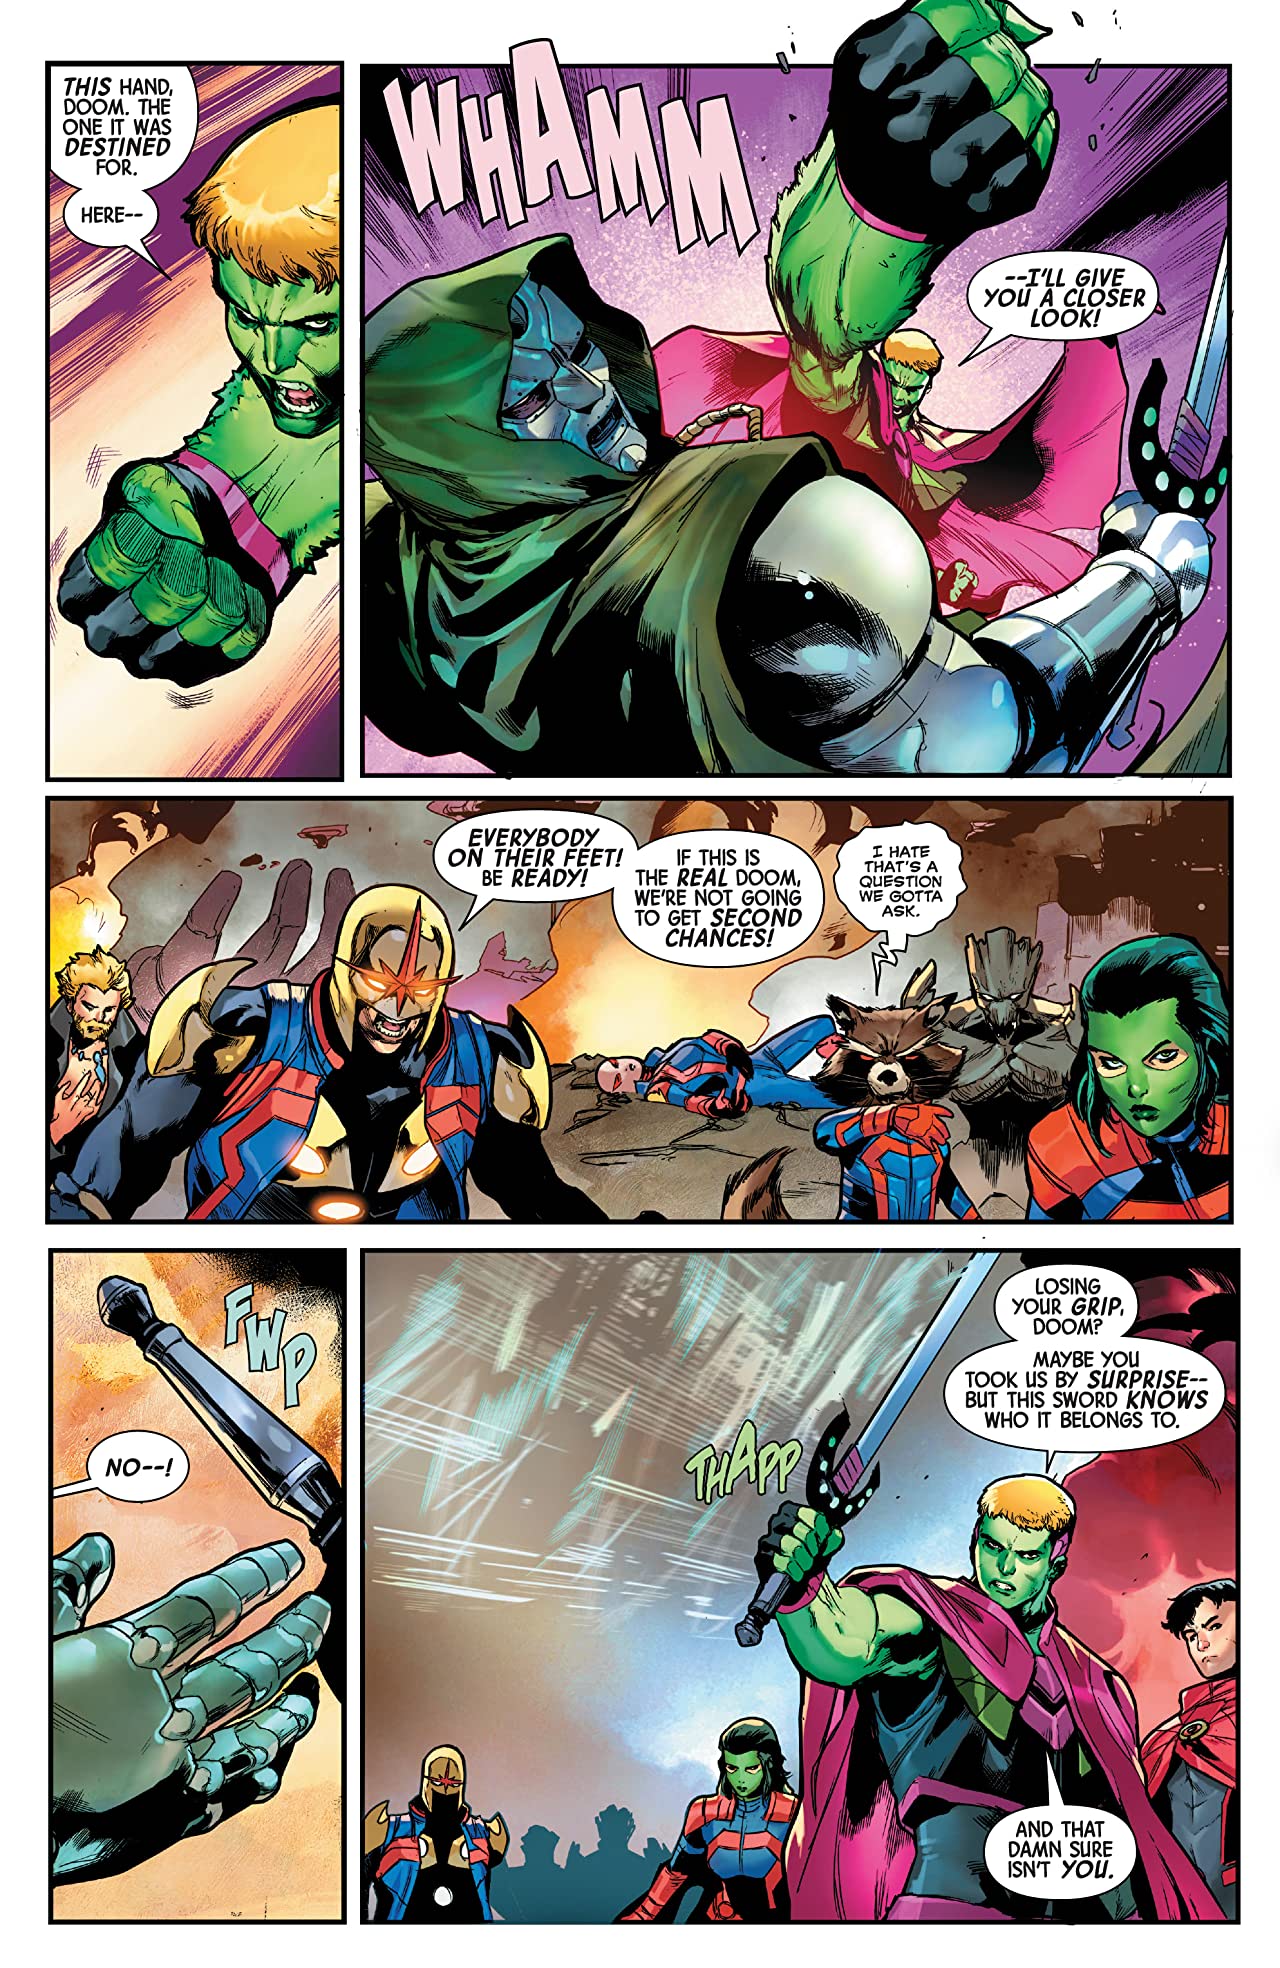 Guardians of the Galaxy 14